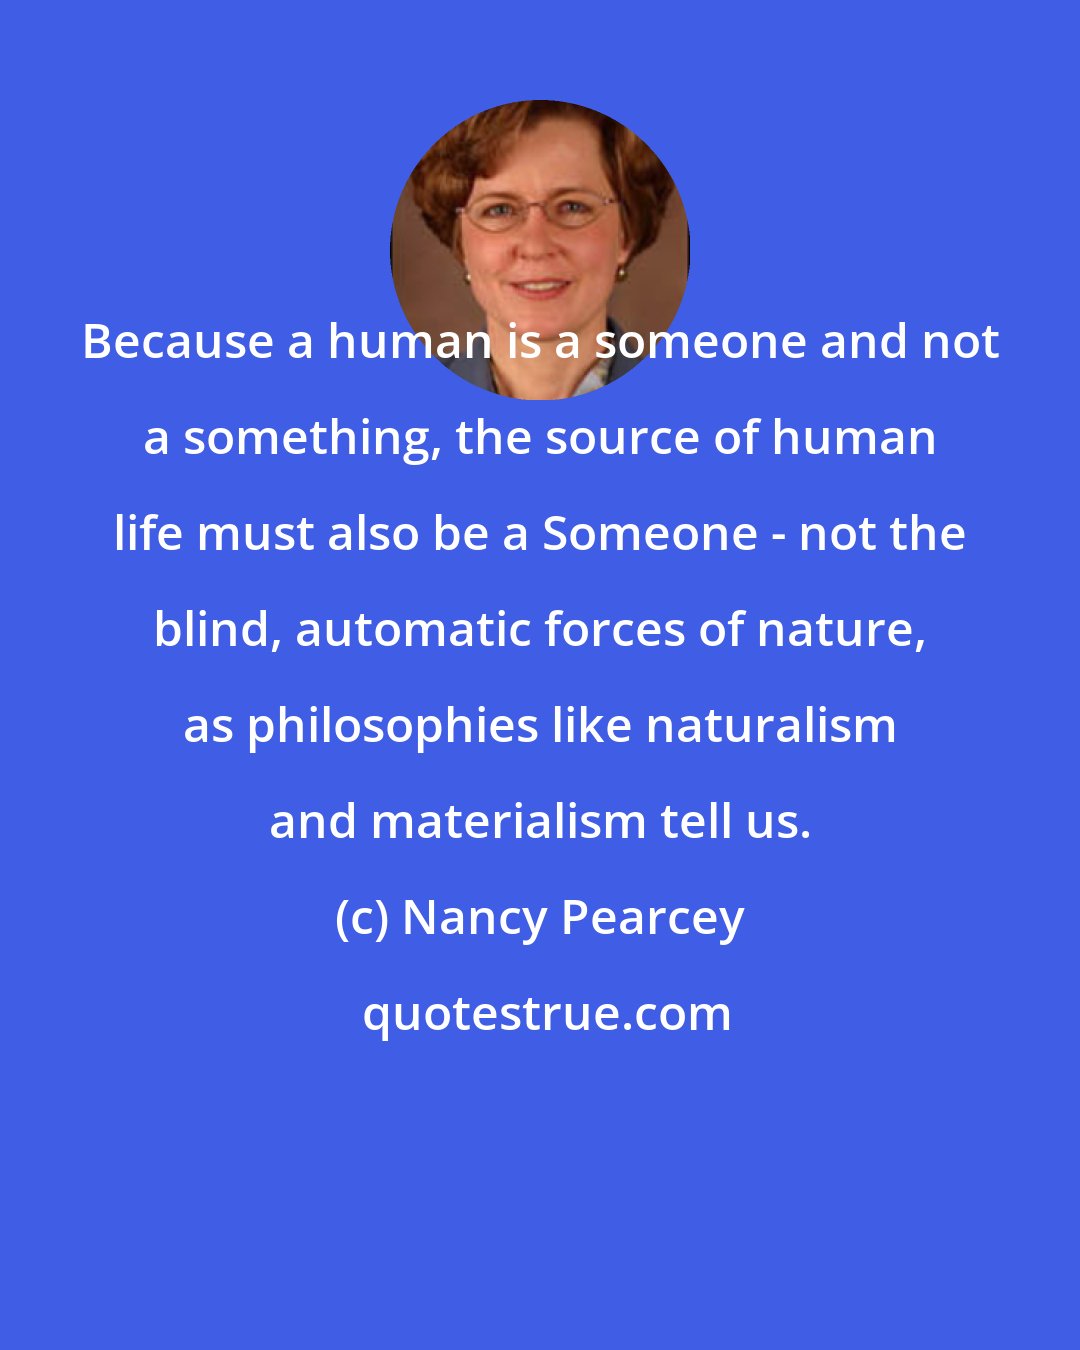 Nancy Pearcey: Because a human is a someone and not a something, the source of human life must also be a Someone - not the blind, automatic forces of nature, as philosophies like naturalism and materialism tell us.